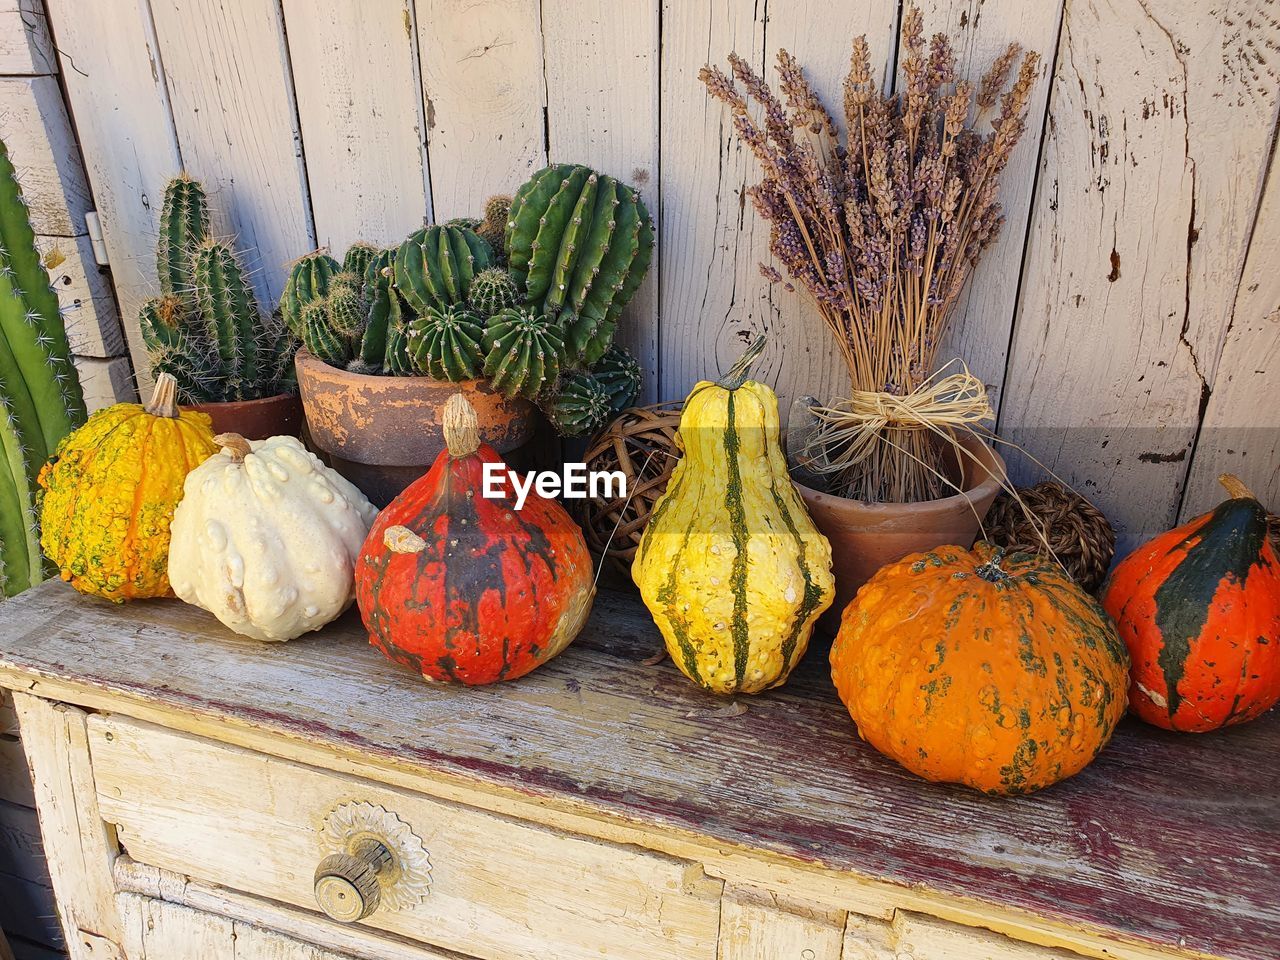 HIGH ANGLE VIEW OF PUMPKINS IN CONTAINER ON TABLE